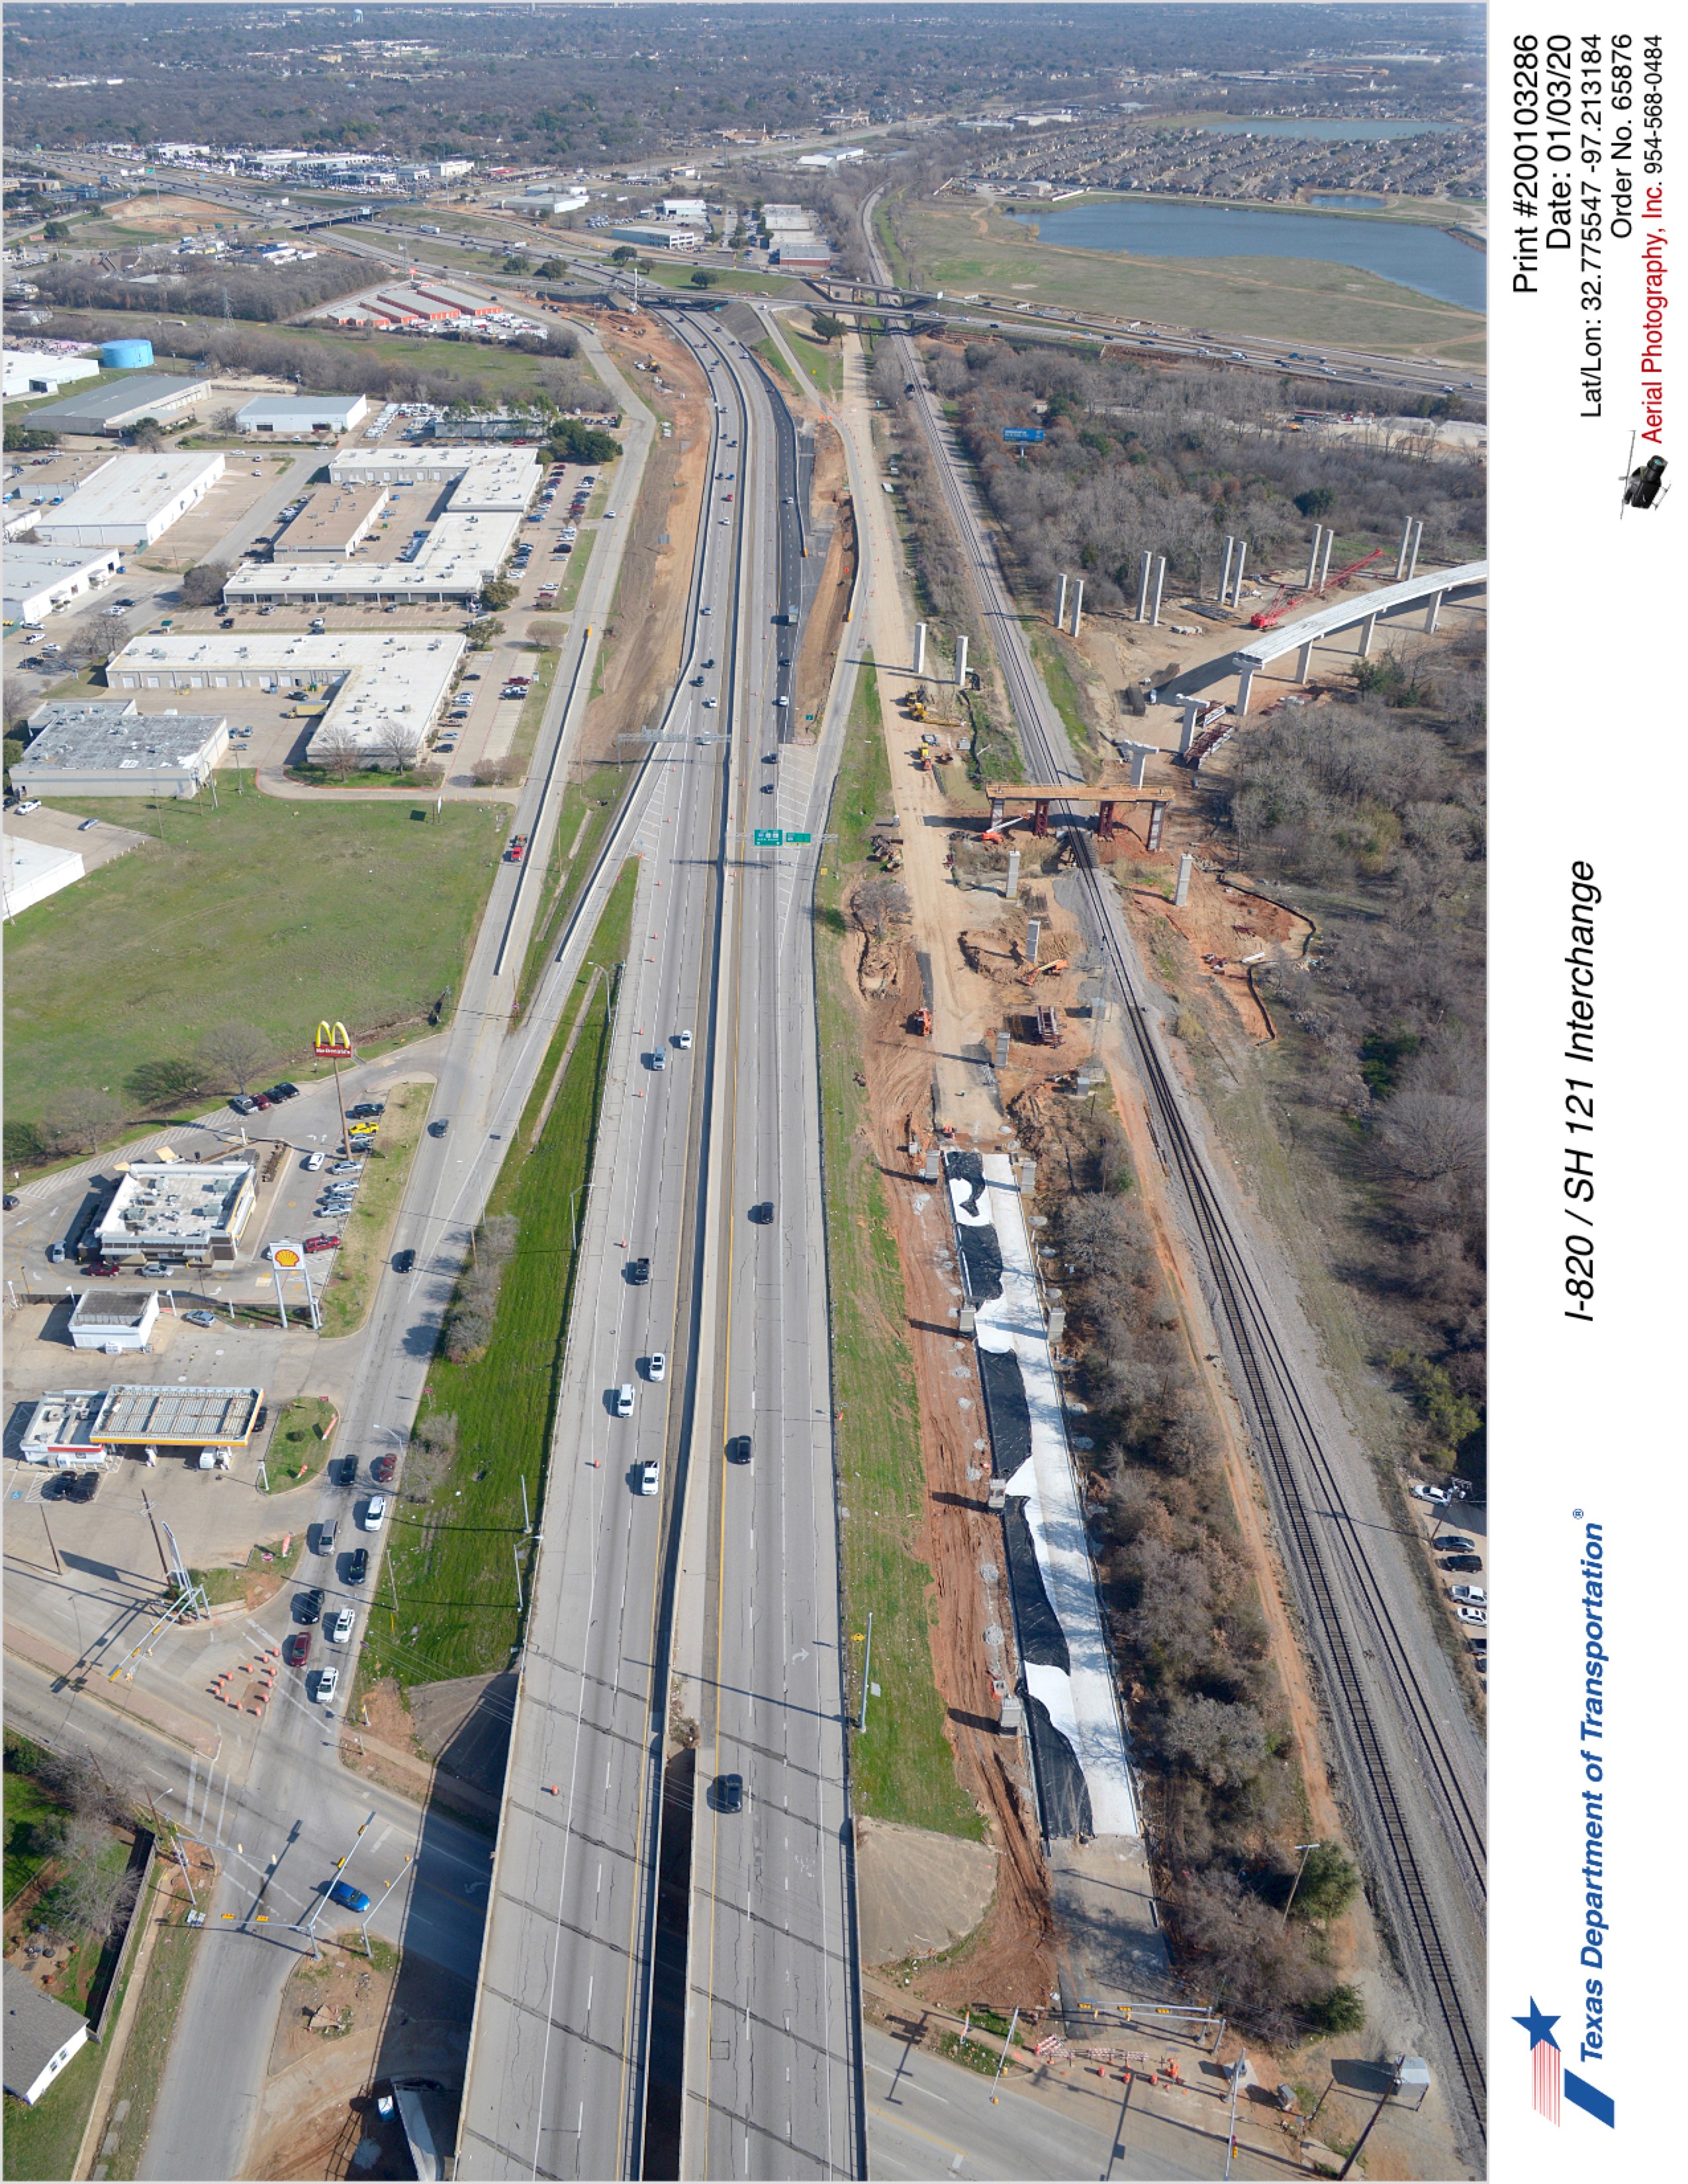 SH 121 looking northeast over Handley-Ederville Rd in foreground. Construction shown on northbound frontage road east of Handley-Ederville Rd and direct connector construction over the Trinity Railway Express line.